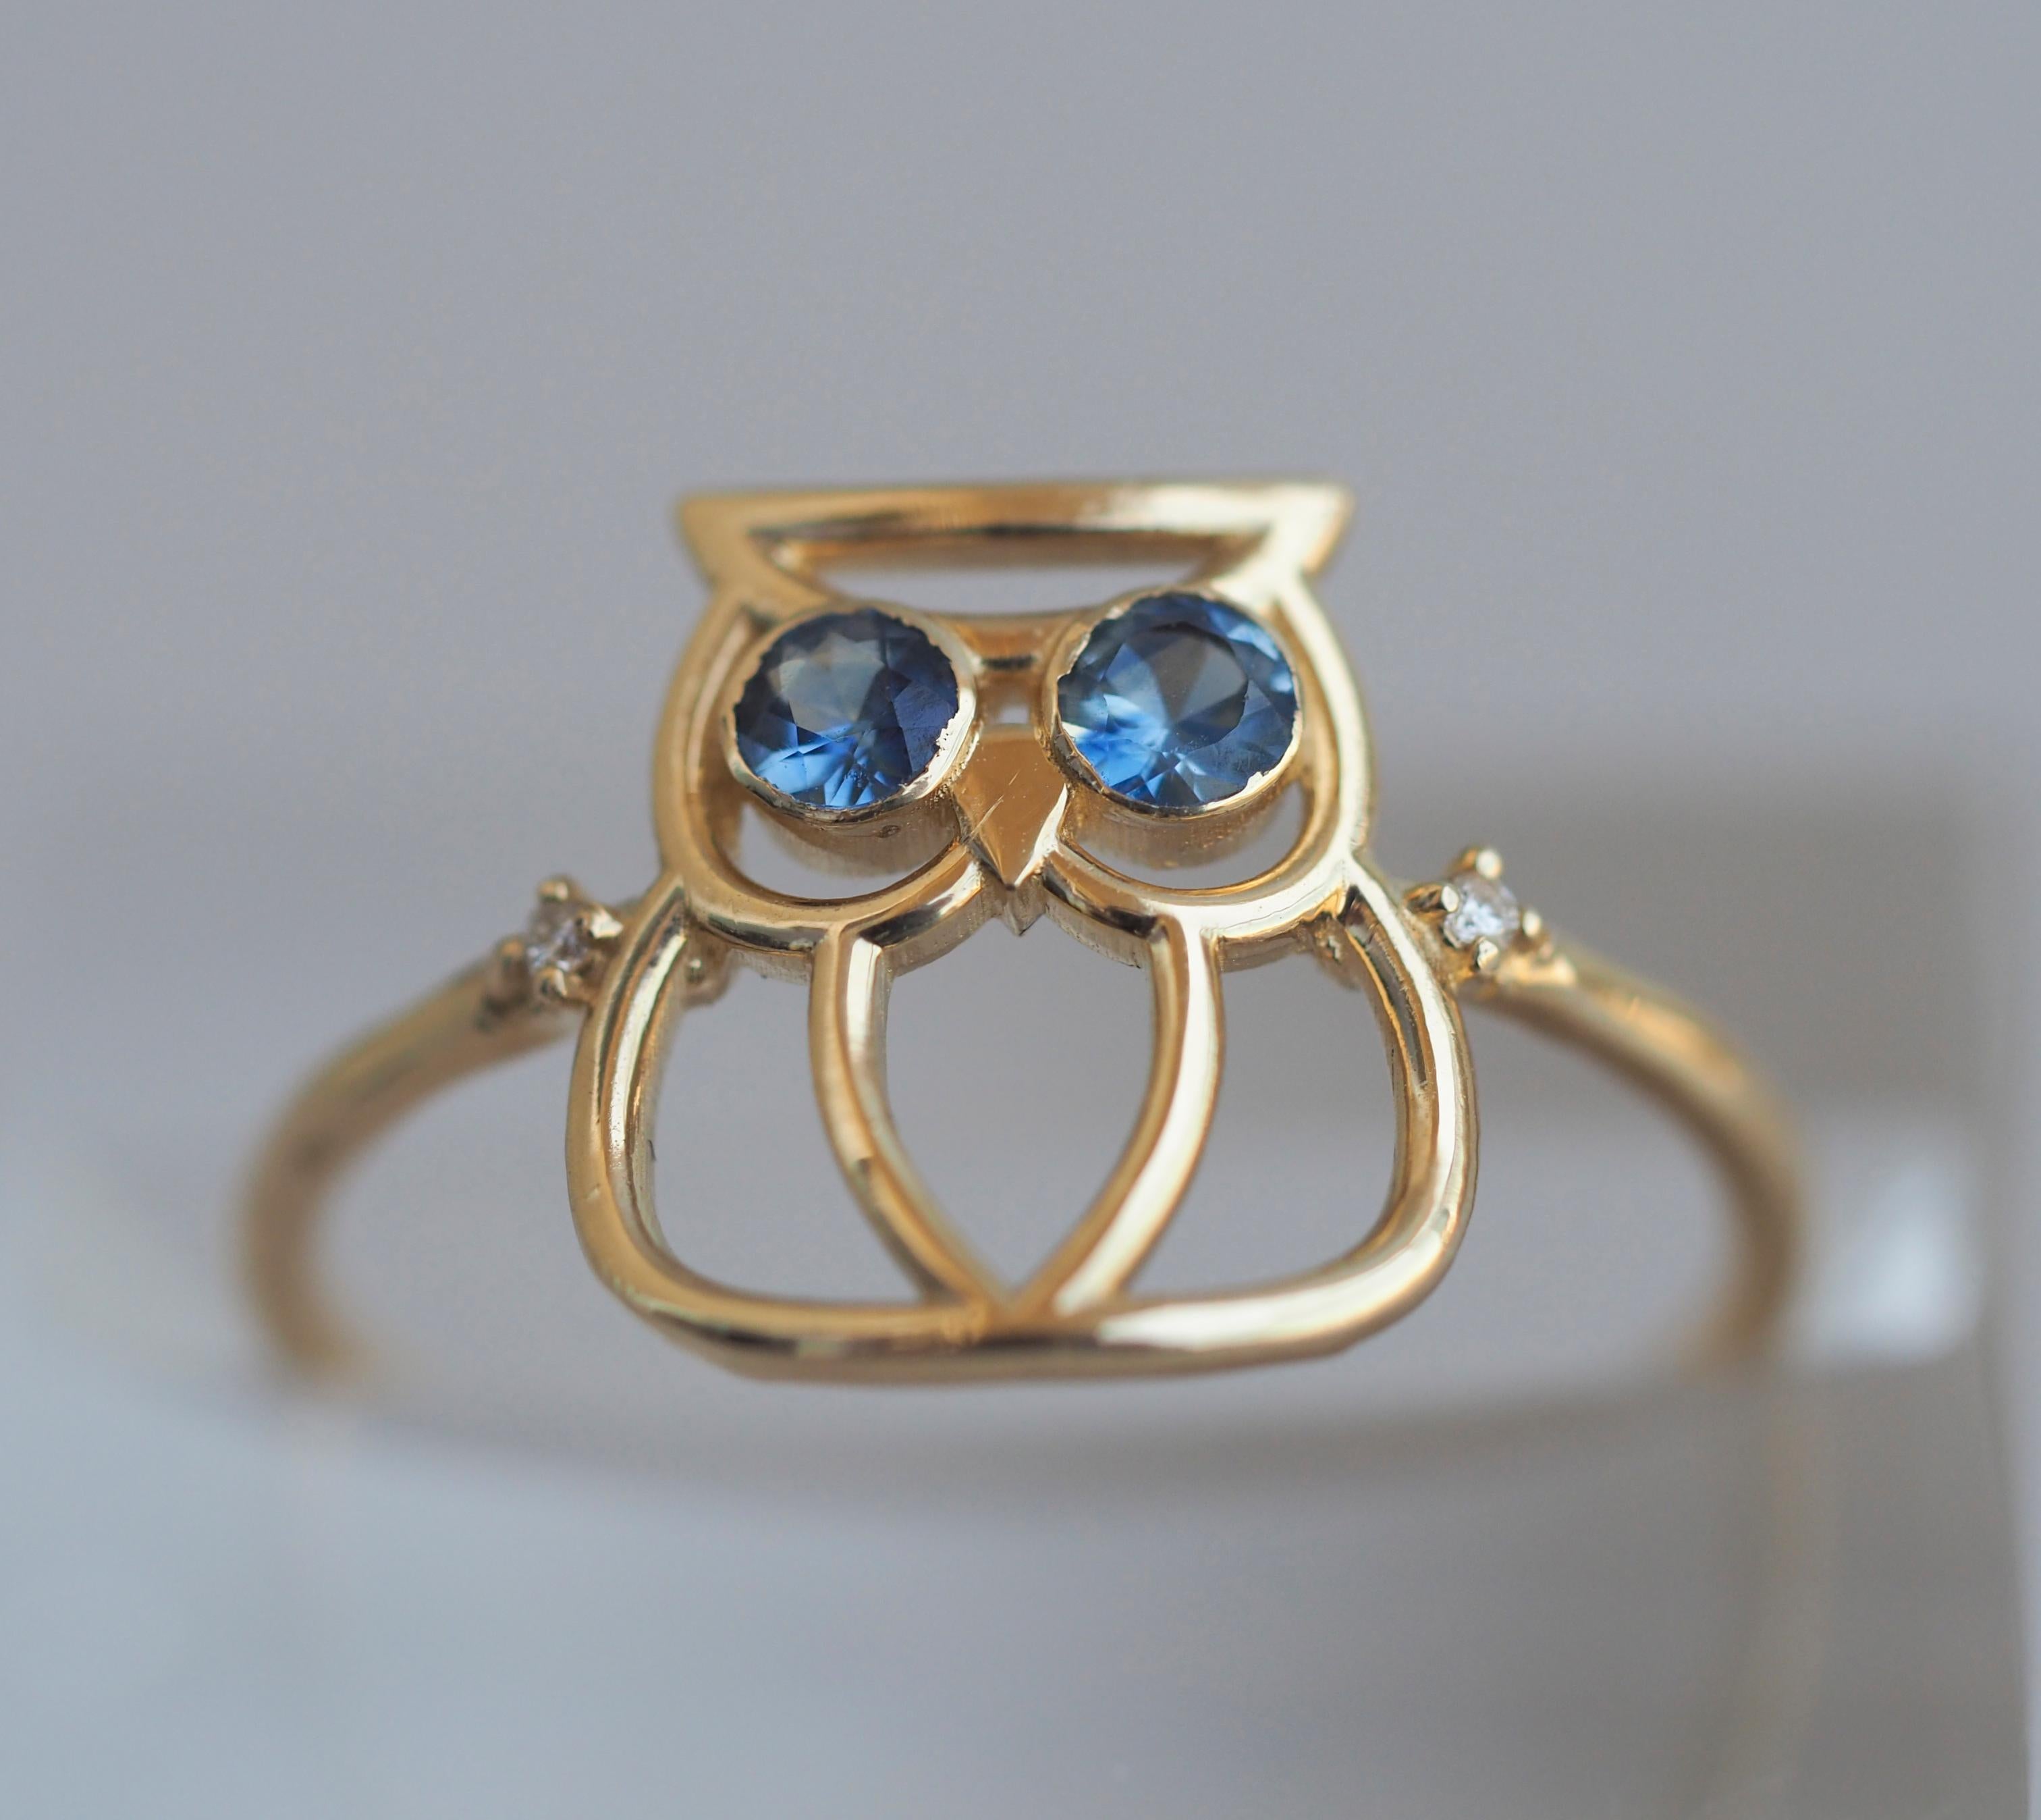 For Sale:  14k Gold Owl Ring with Tanzanite and Diamonds 8